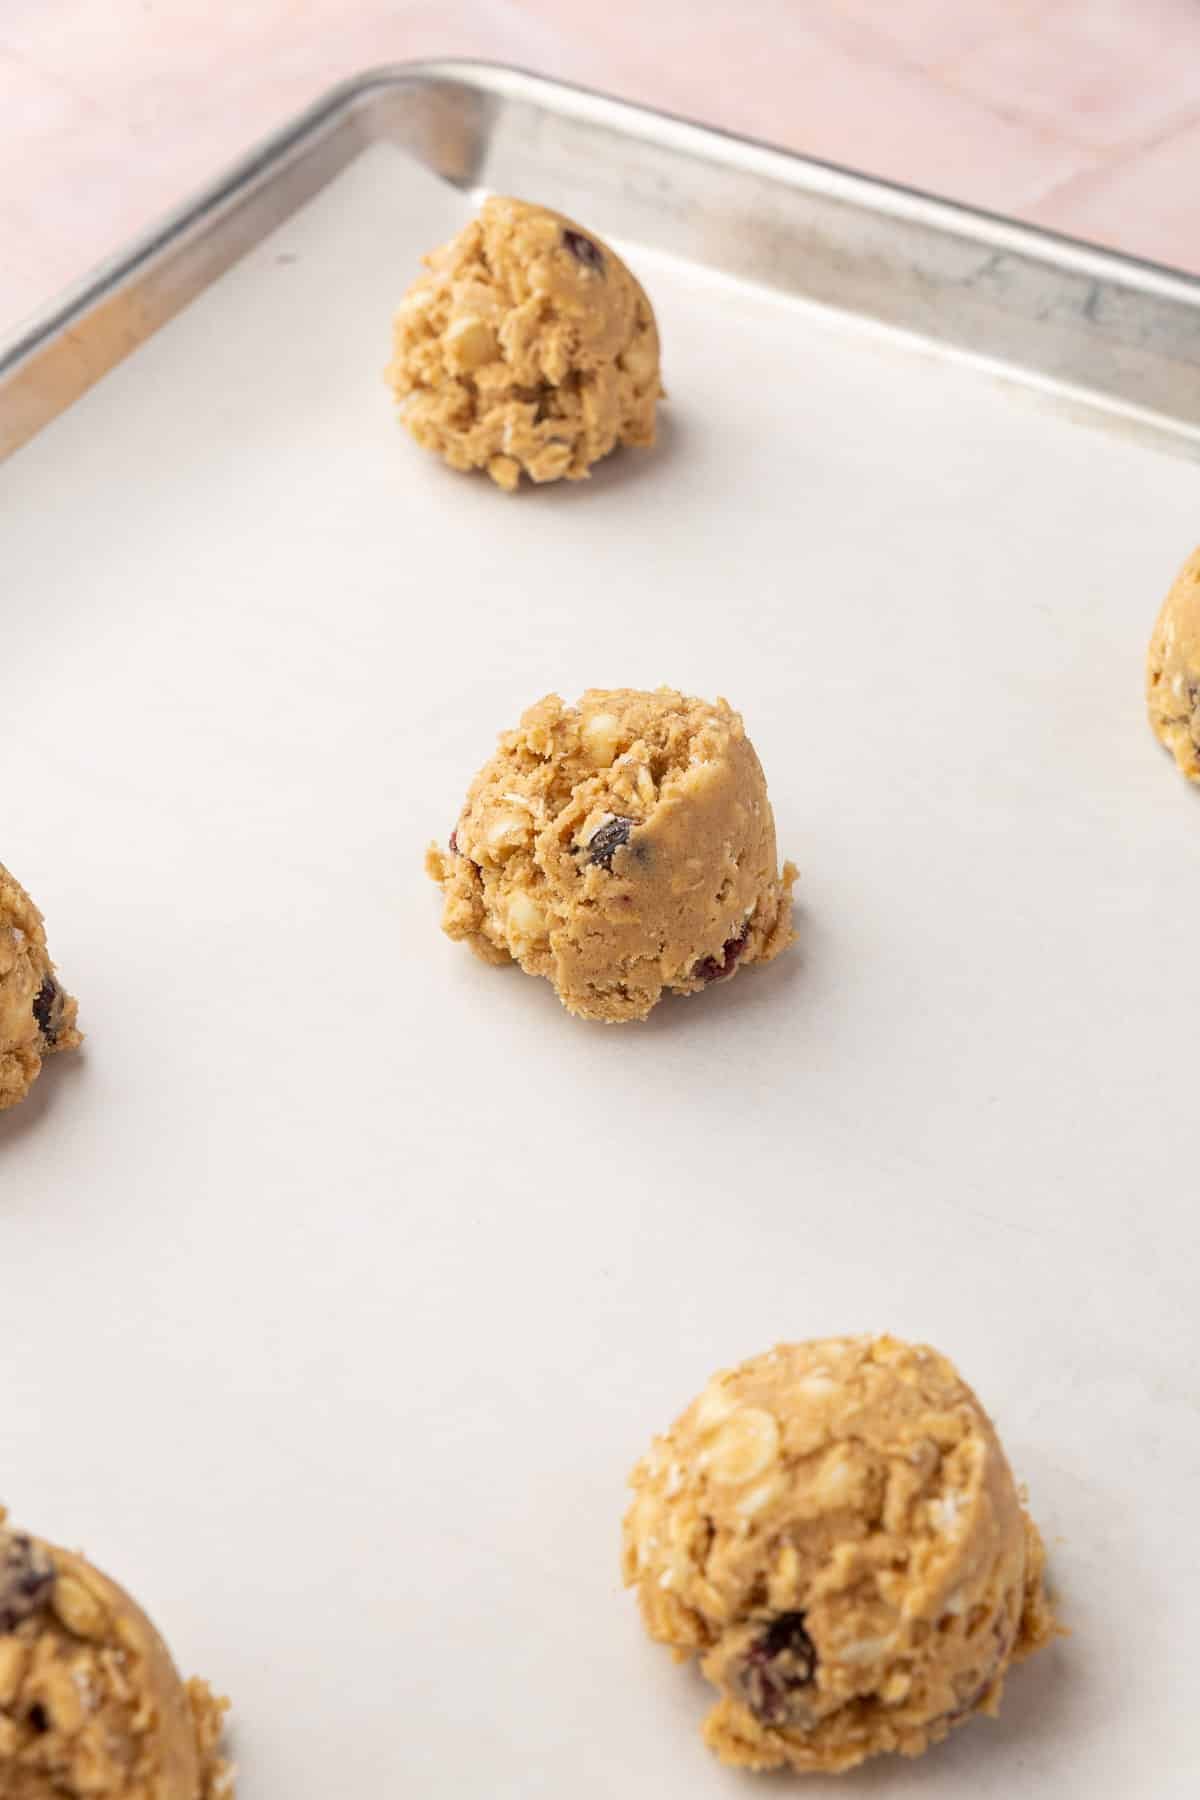 Balls of oatmeal craisin cookie dough on a baking sheet lined with parchment paper.